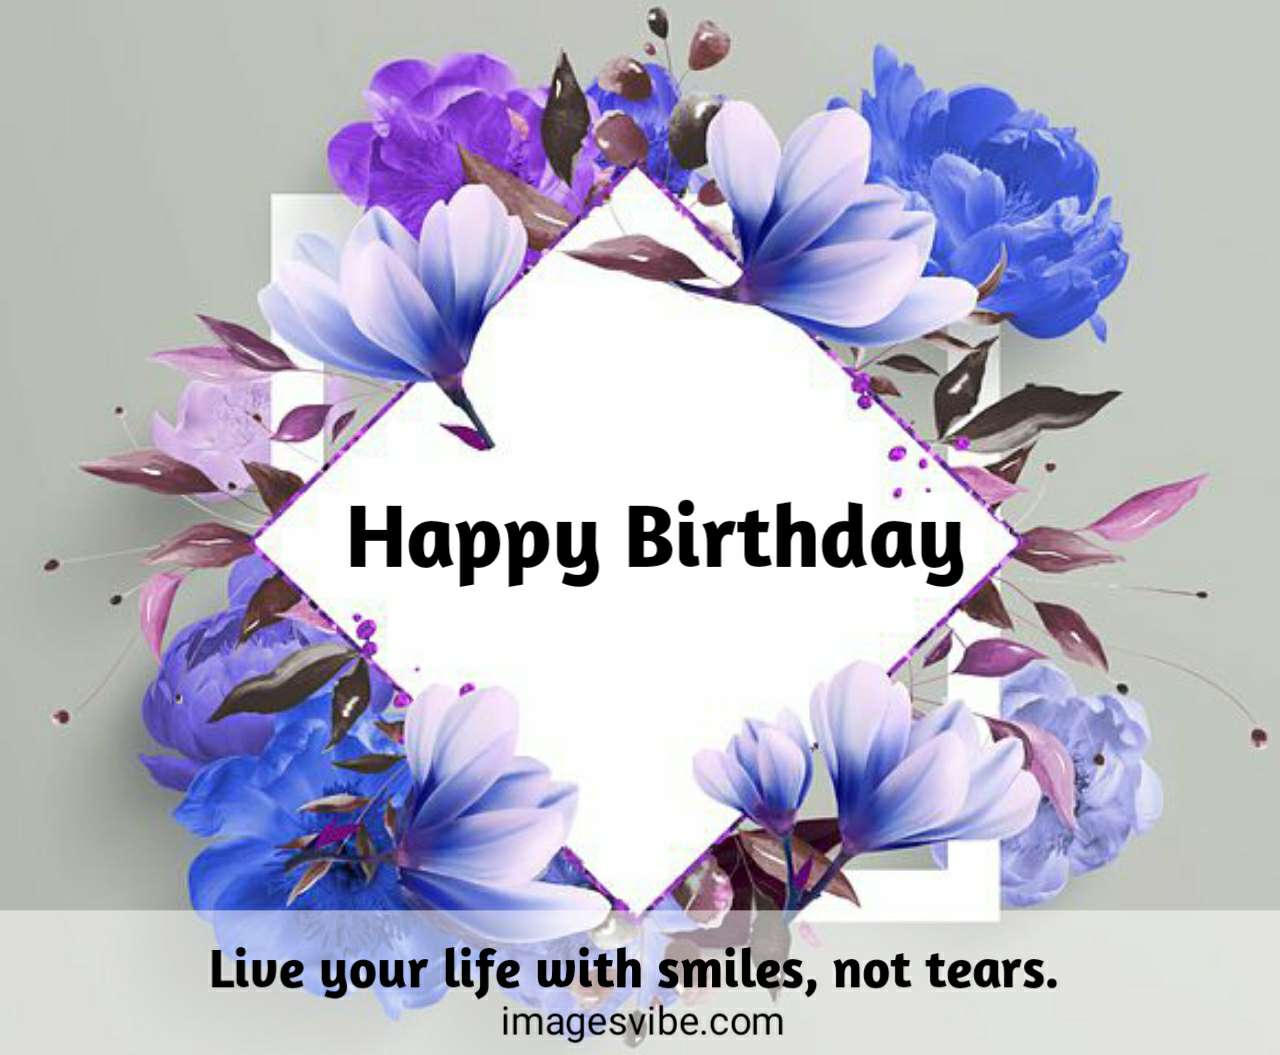 Best 30+ Happy Birthday Wishes Images Download in 2023 - Images Vibe